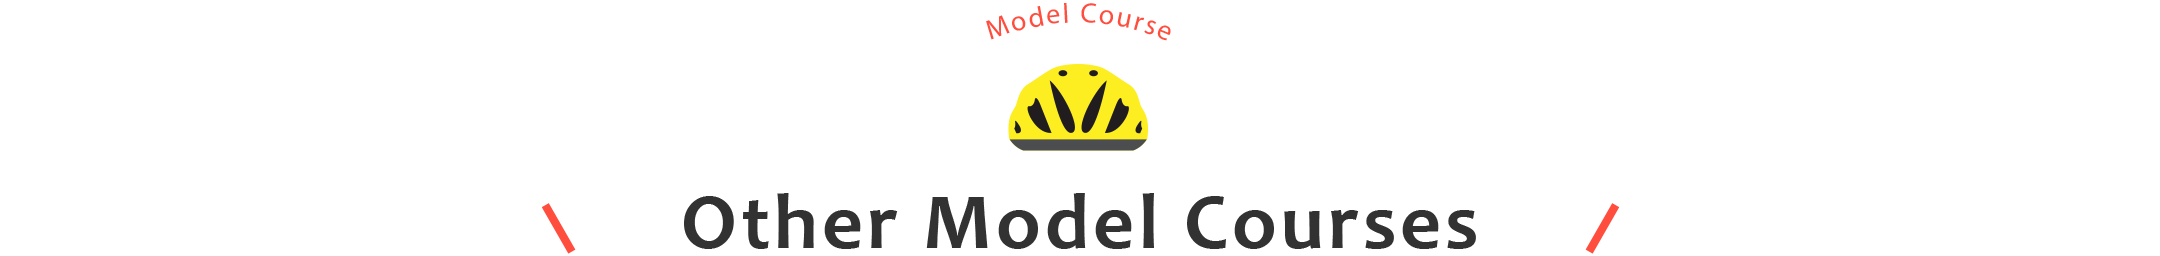 Other Model Courses